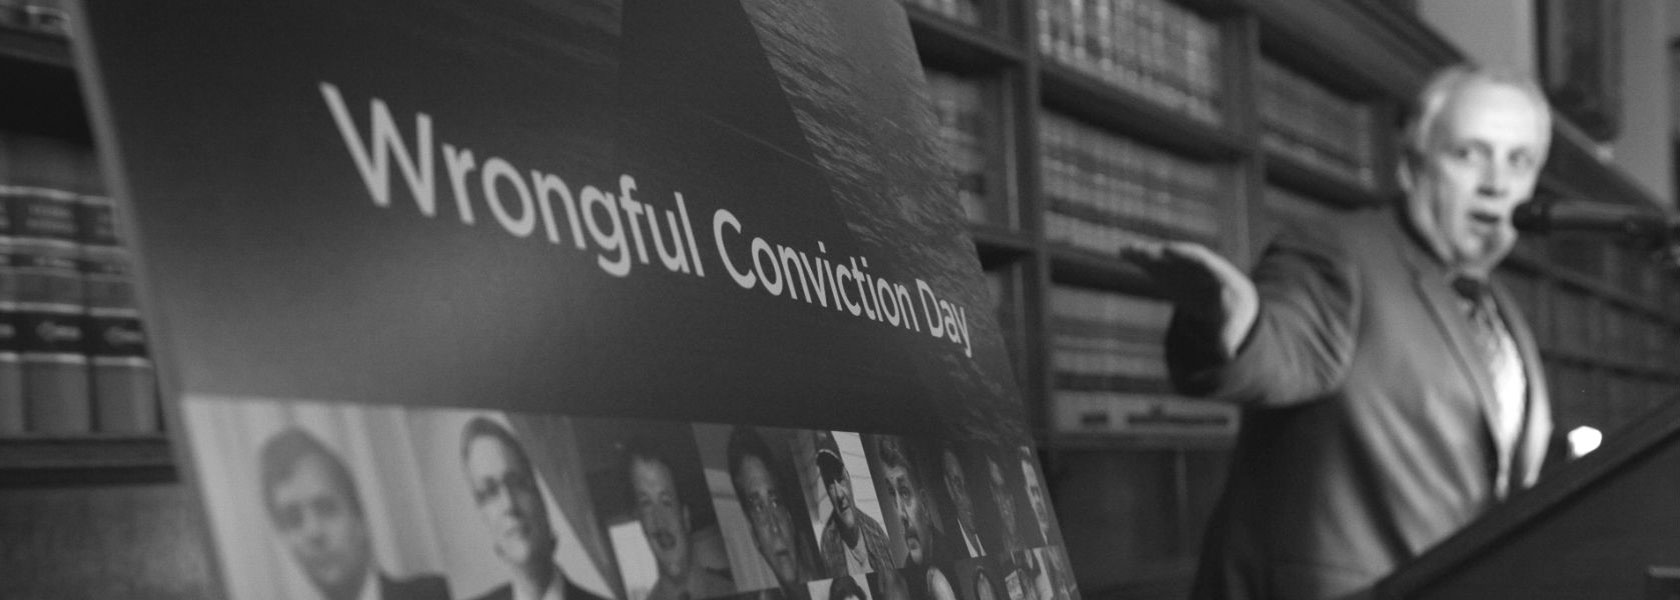 wrongful conviction day speaker